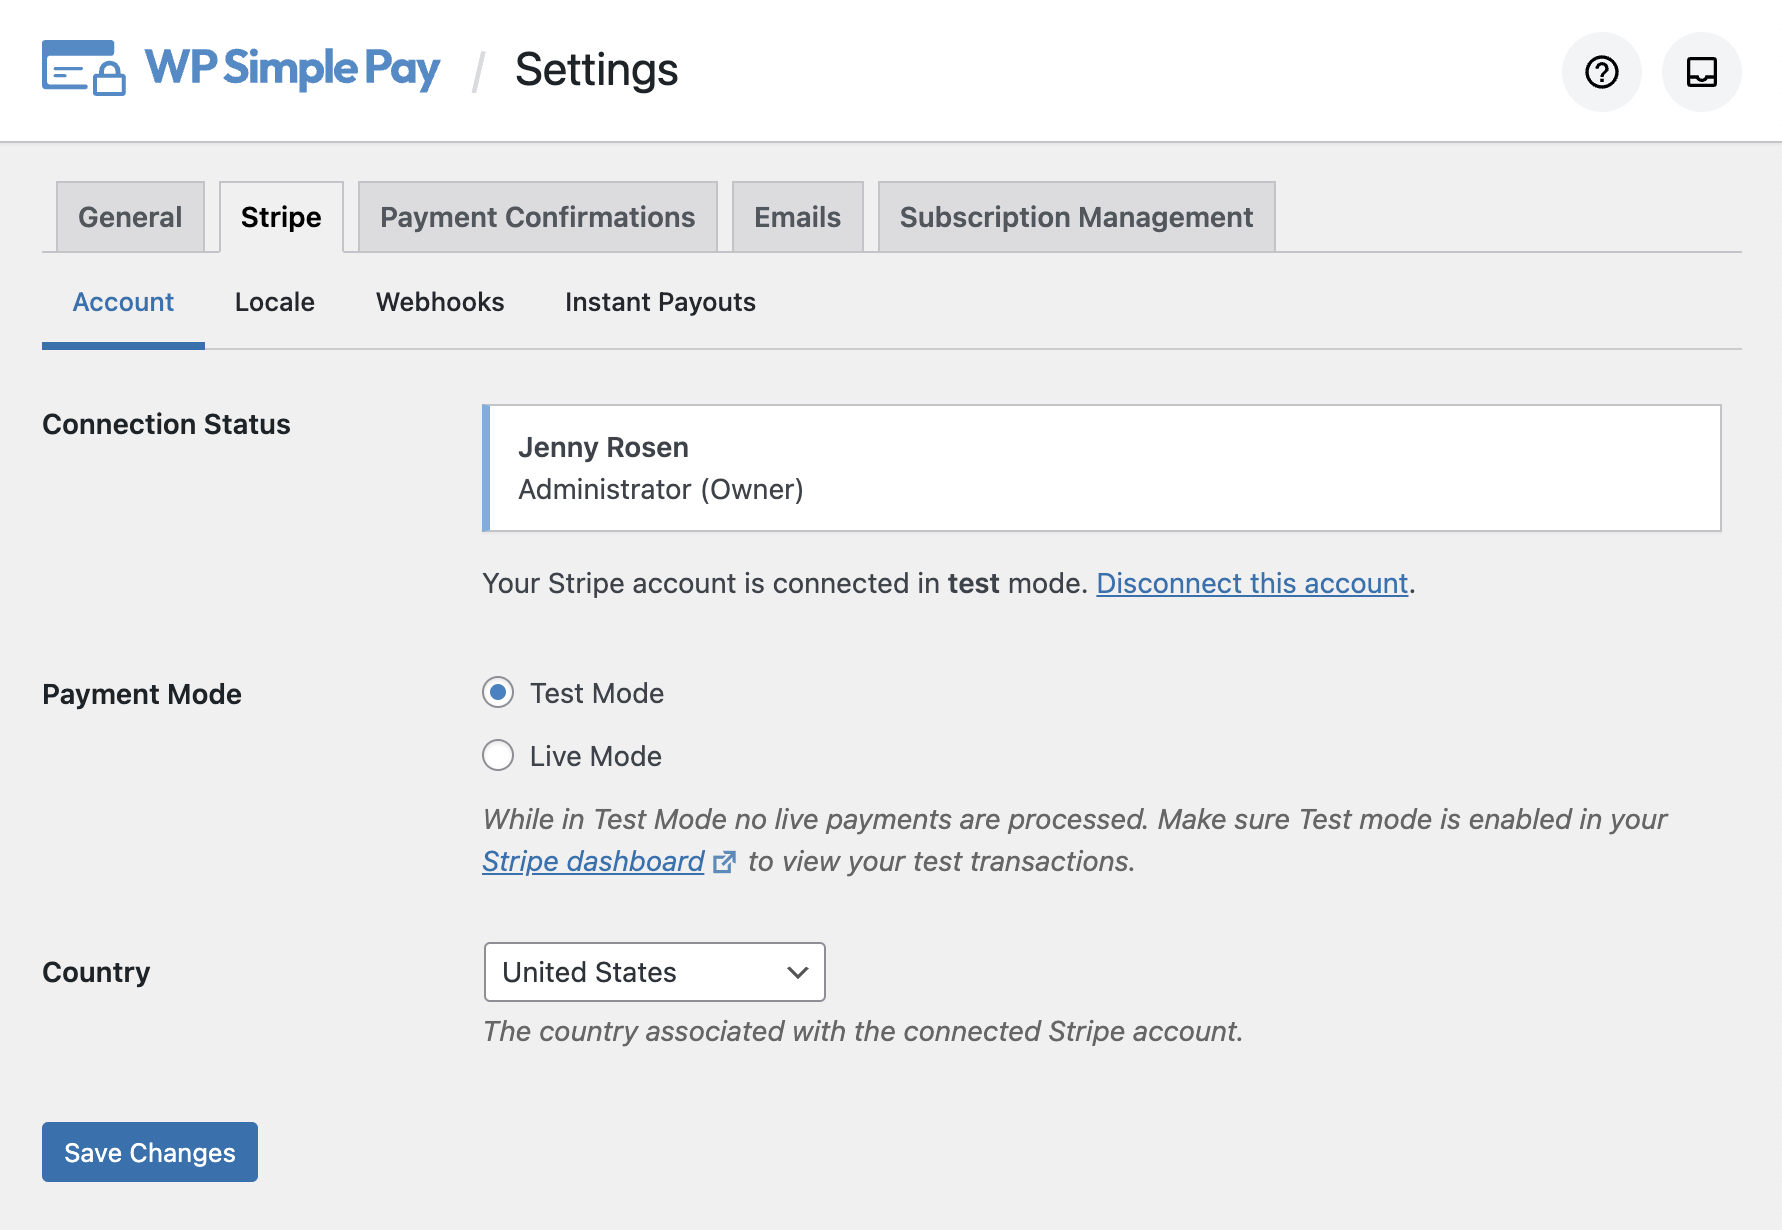 WP Simple Pay Stripe account settings